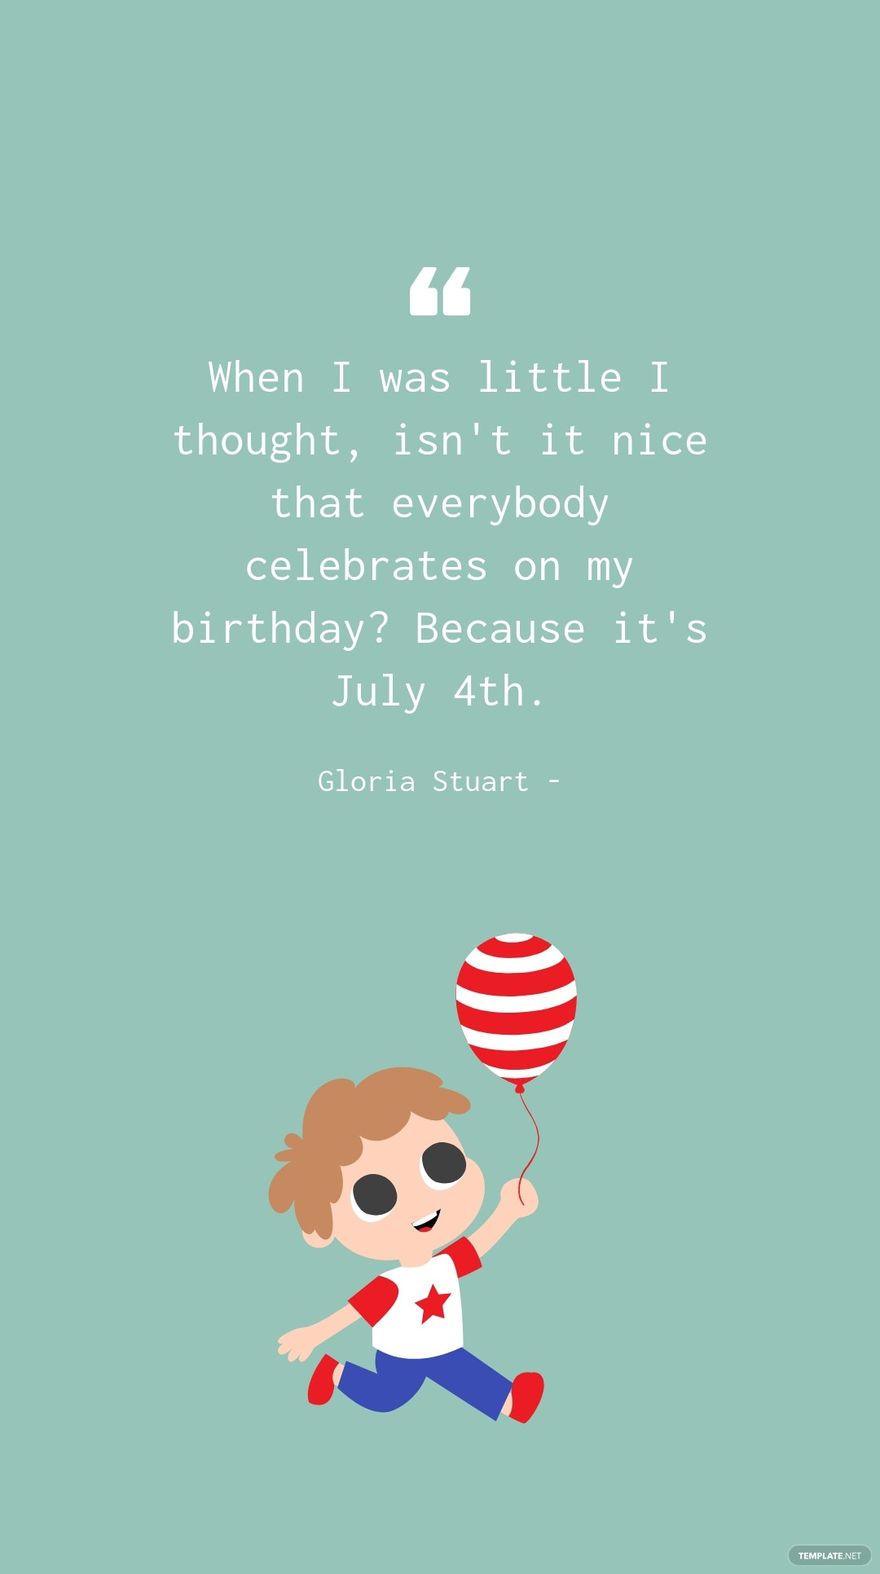 Gloria Stuart - When I was little I thought, isn't it nice that everybody celebrates on my birthday? Because it's July 4th.